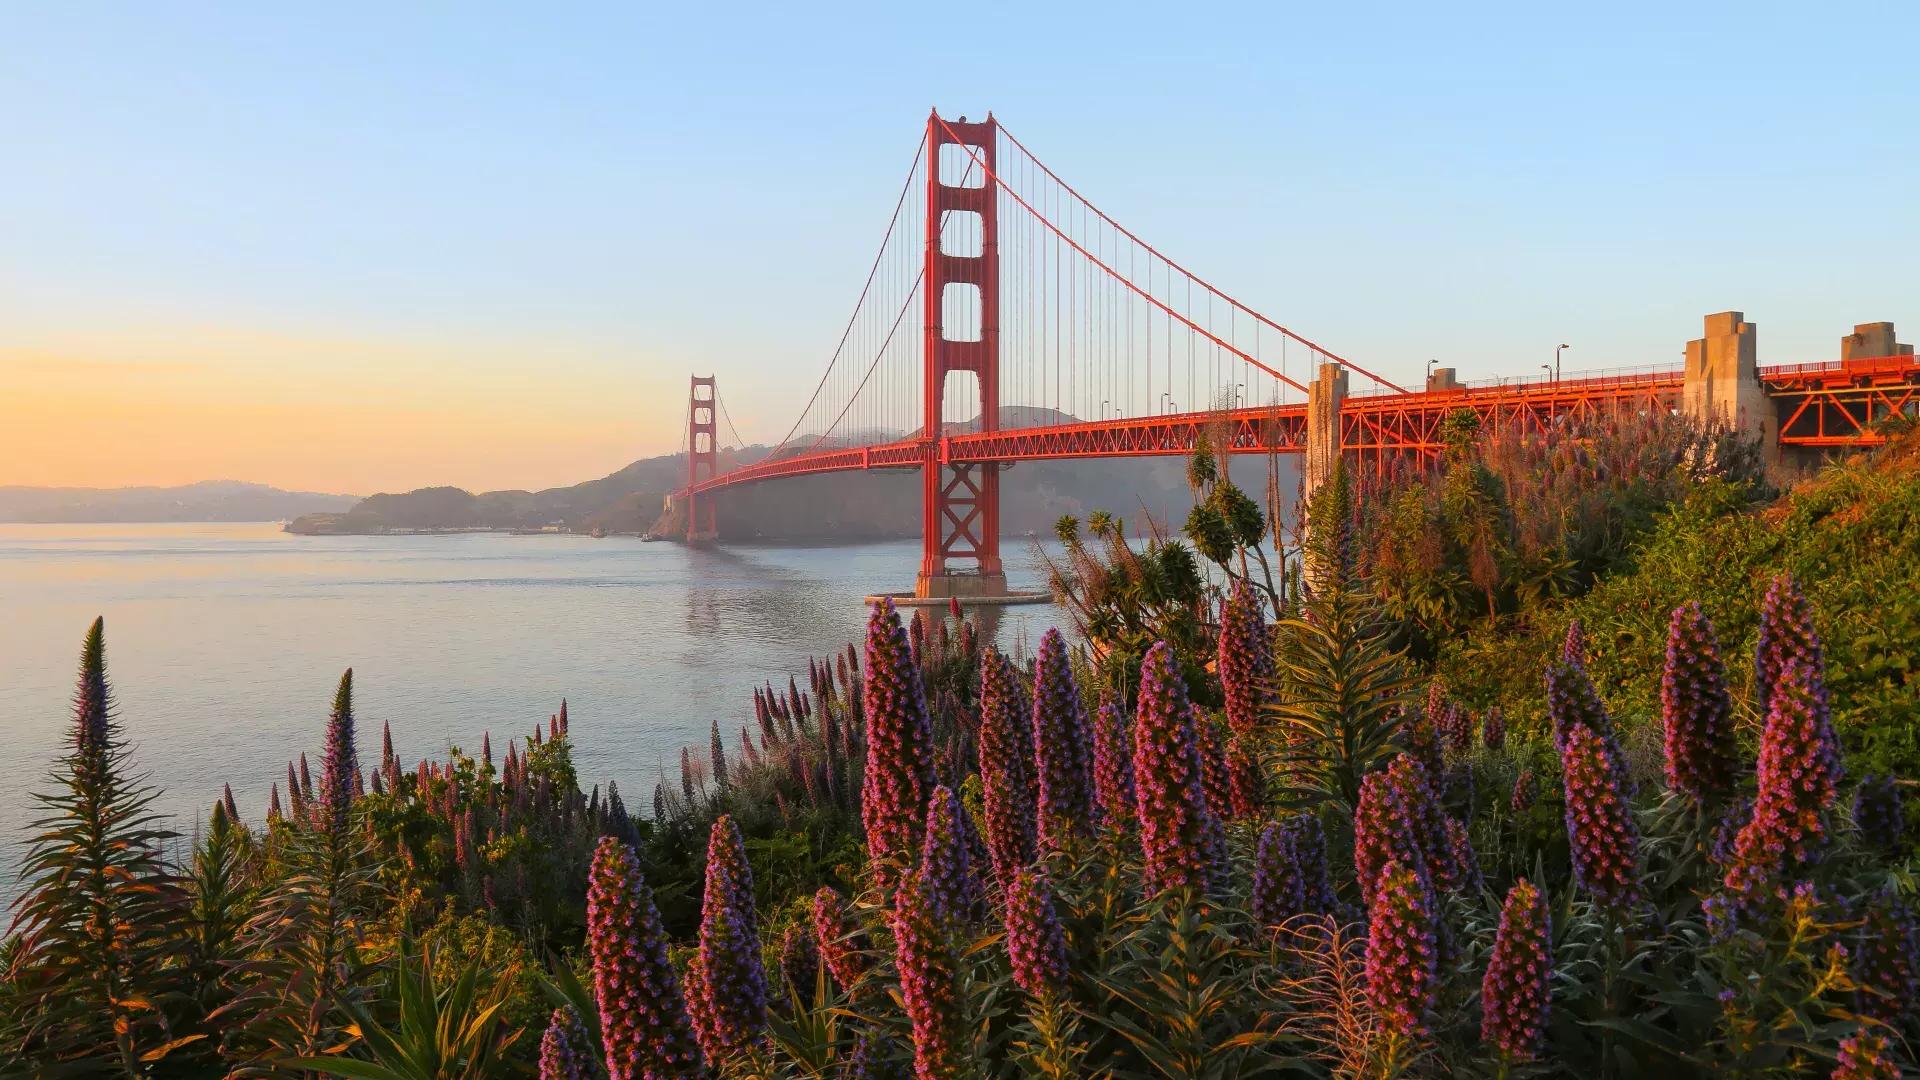 The Golden Gate Bridge is pictured with large flowers in the foreground.